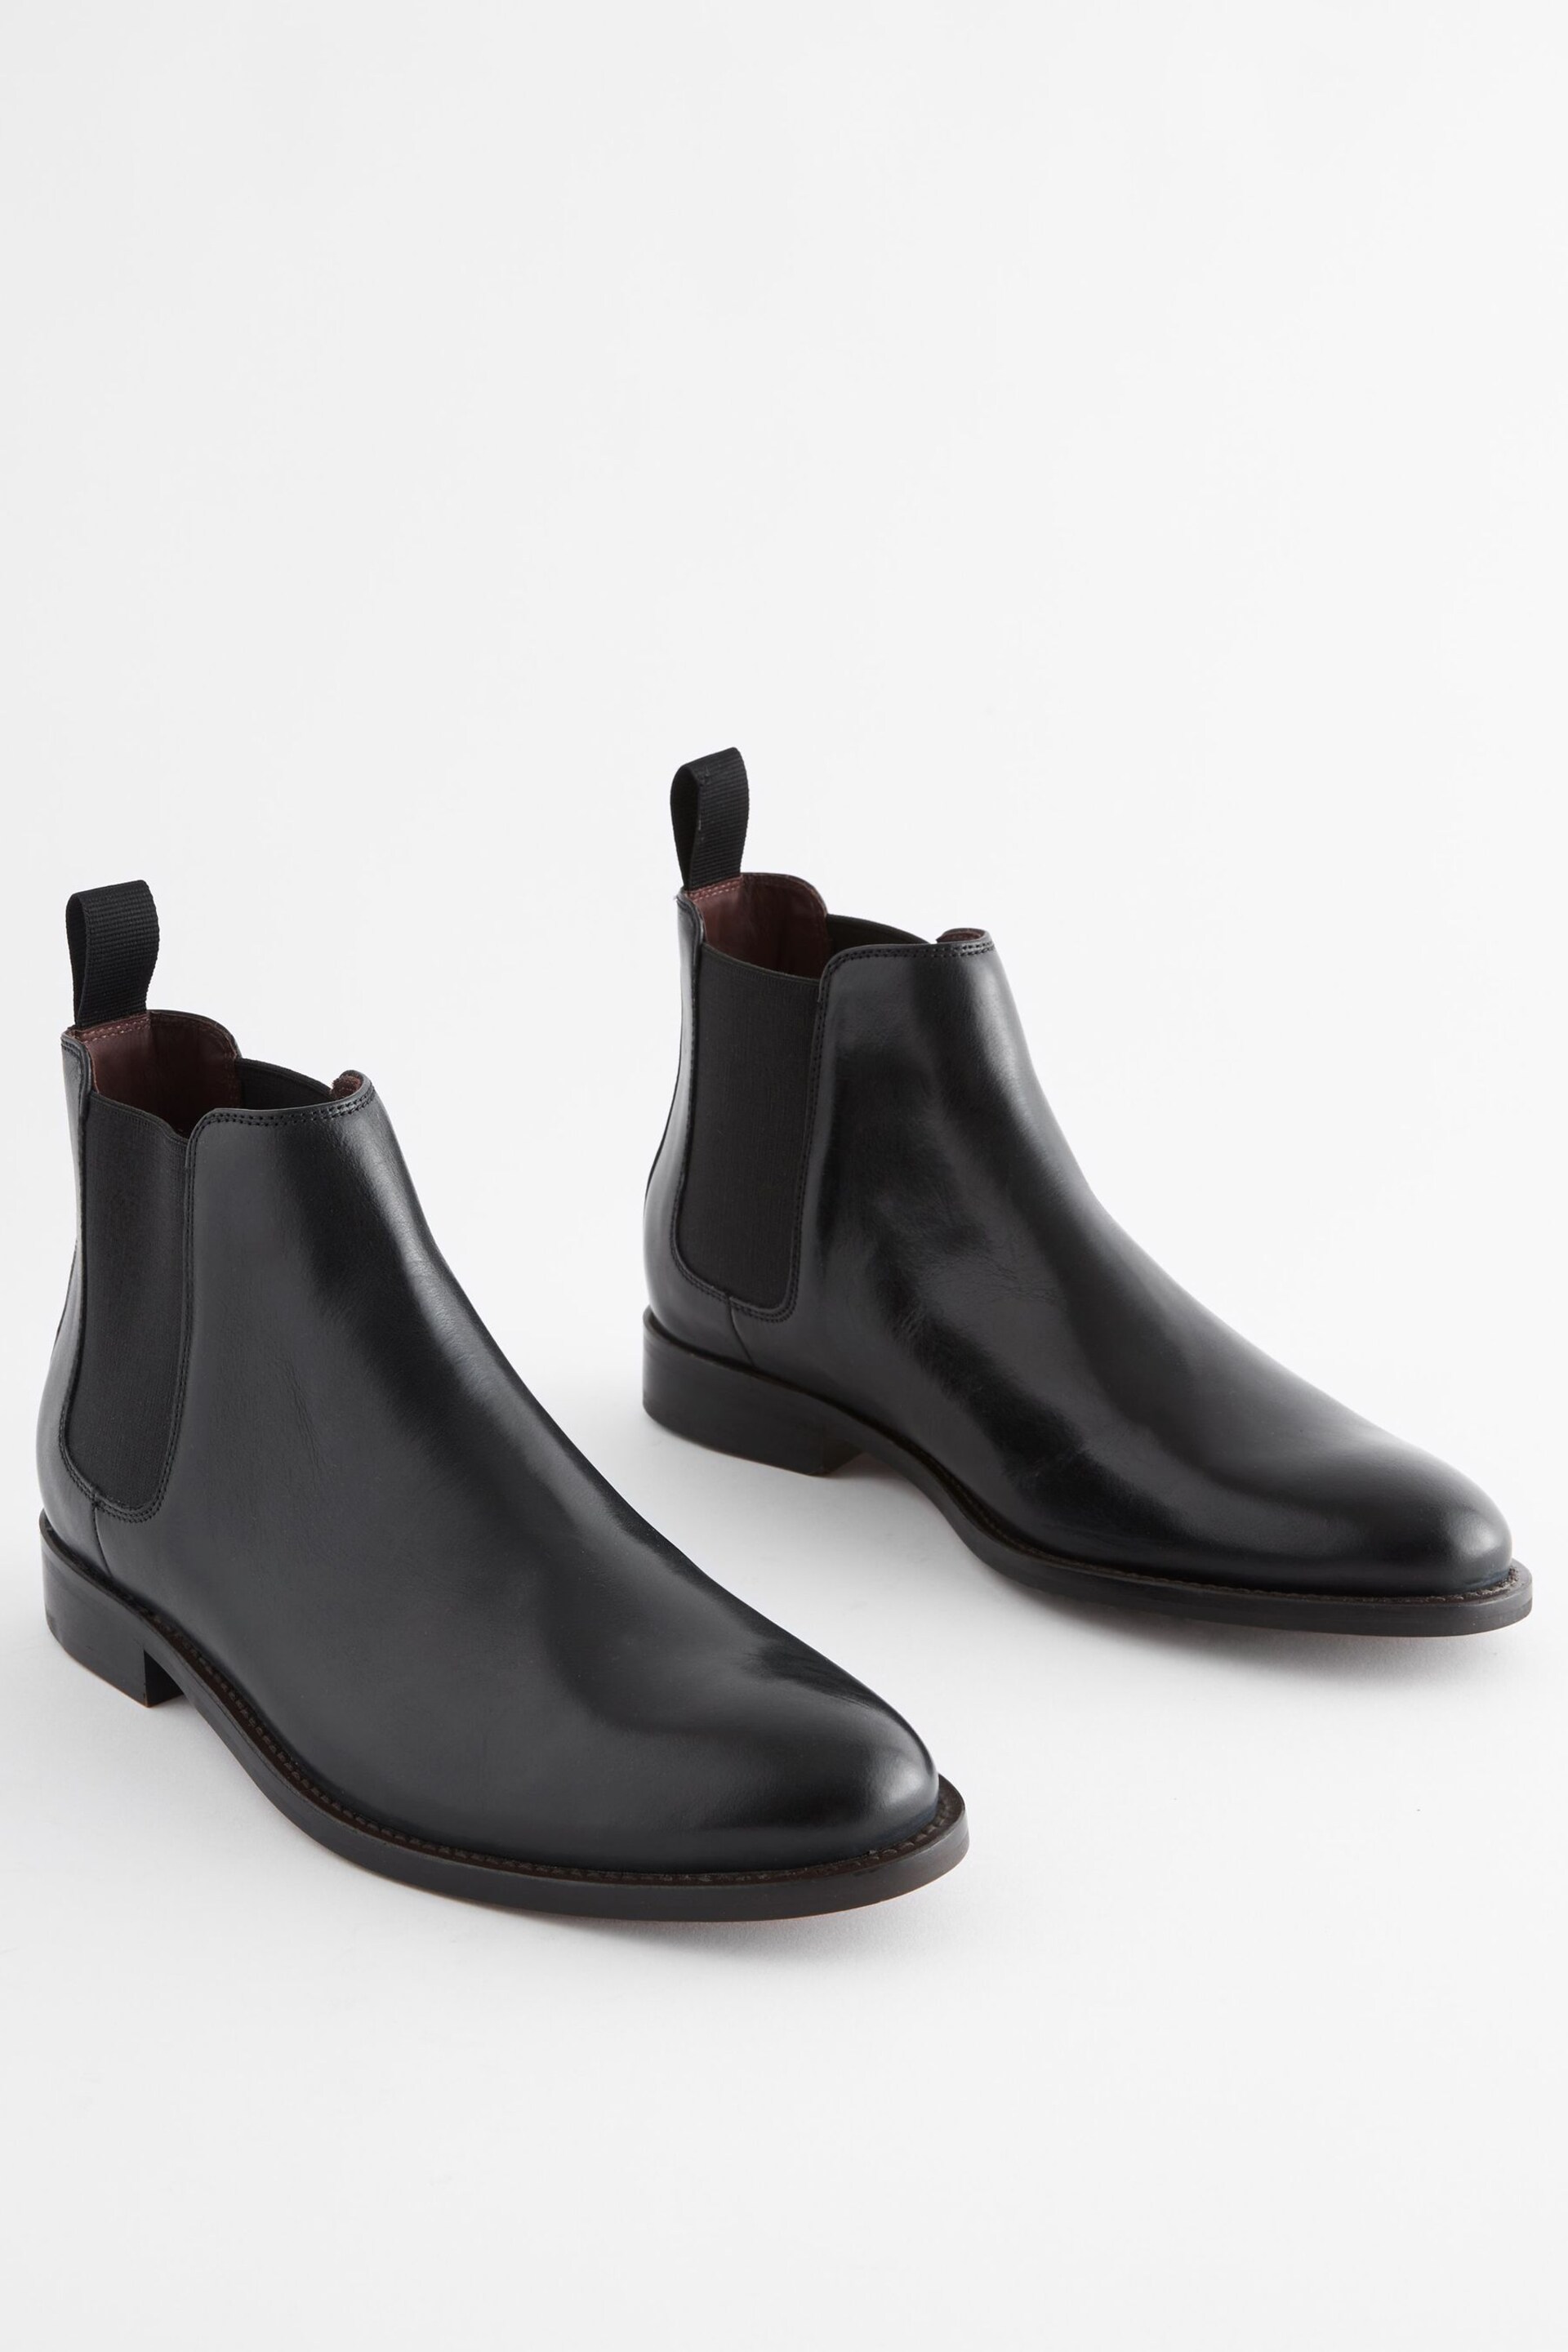 Black Signature Leather Chelsea Boots - Image 1 of 6